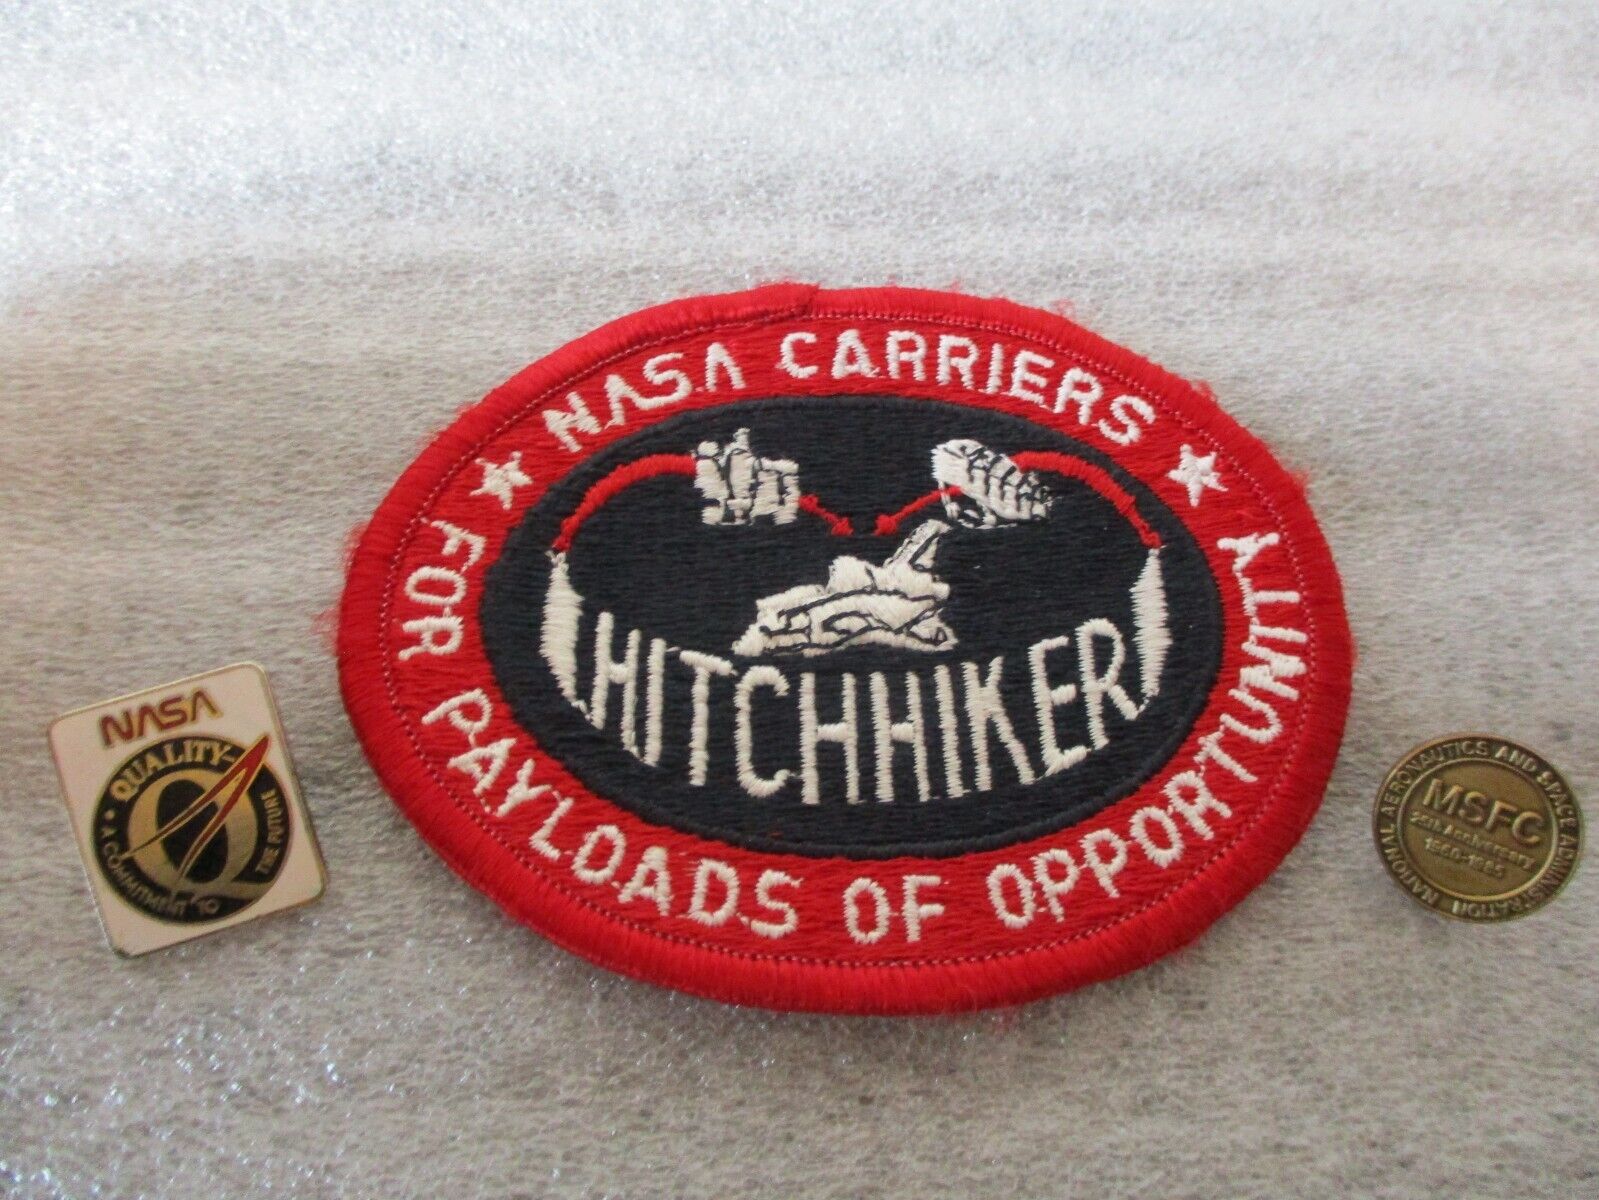 VTG NASA PATCH HITCHHIKER NASA CARRIERS For PAYLOADS of OPPORTUNITY+MSFC PINS